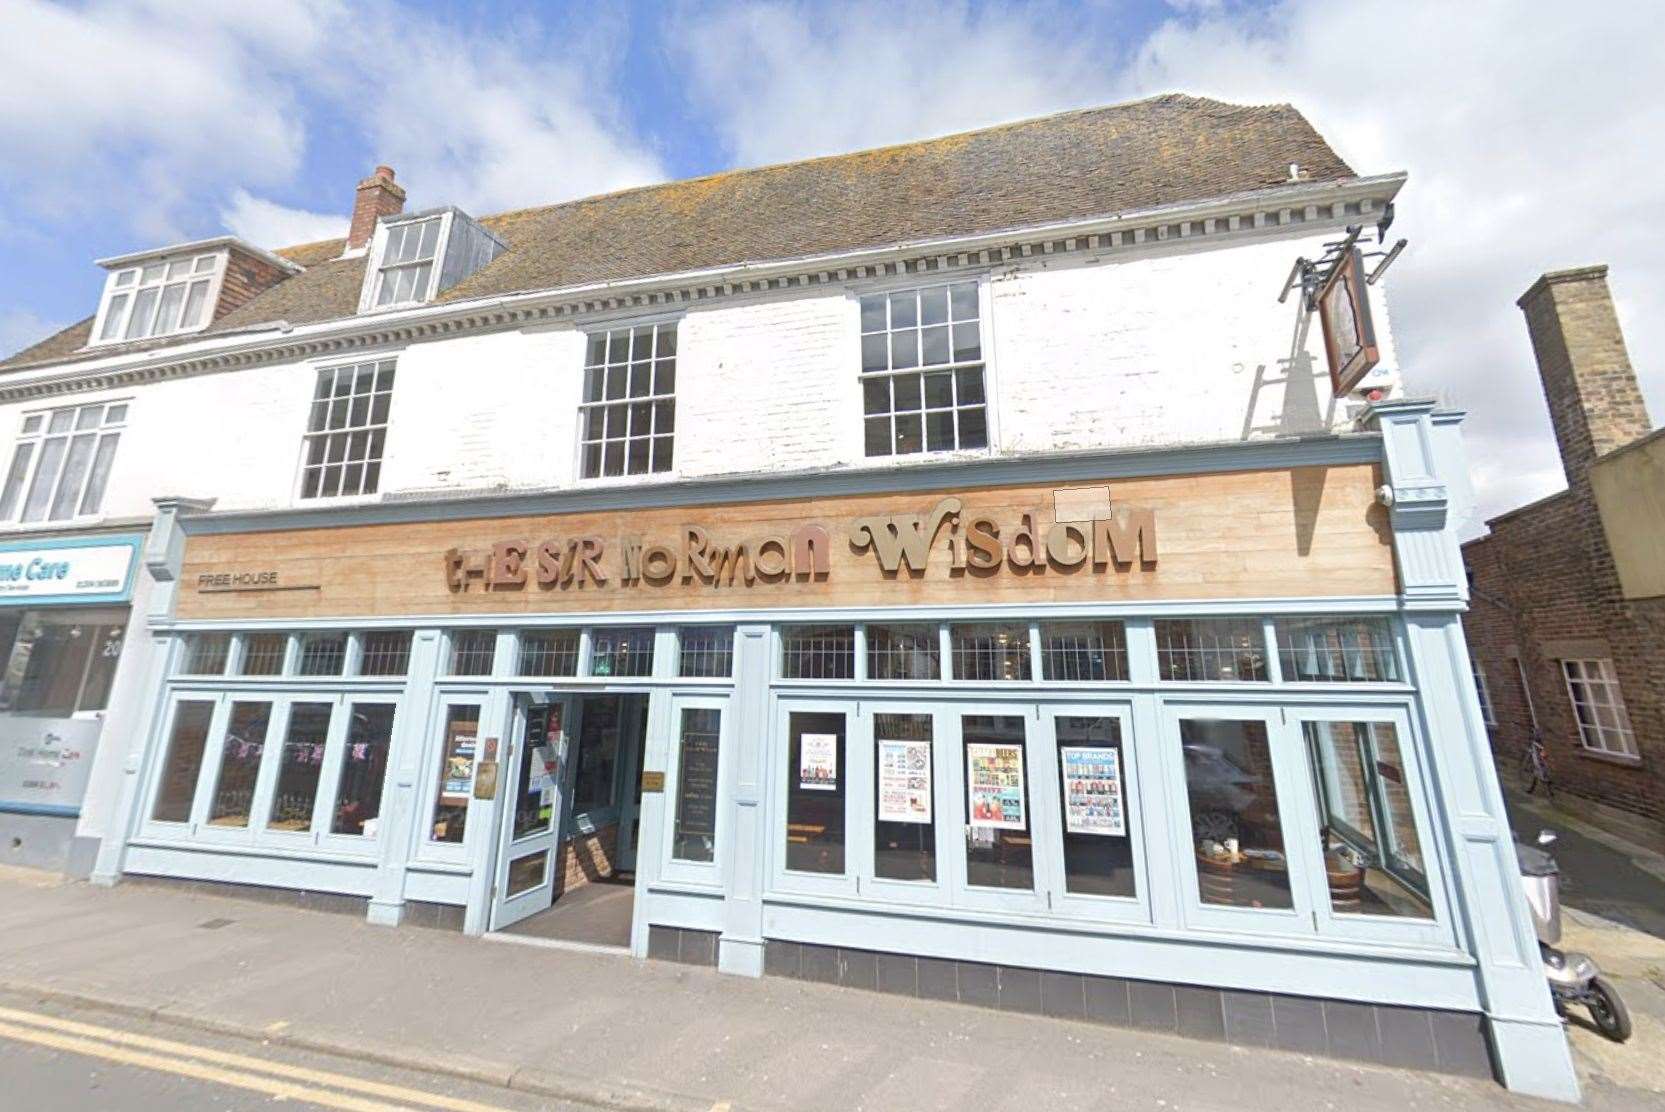 Three of the four assaults committed by Harley Moore took place at The Sir Norman Wisdom Wetherspoon in Queen Street, Deal. Picture: Google Street View